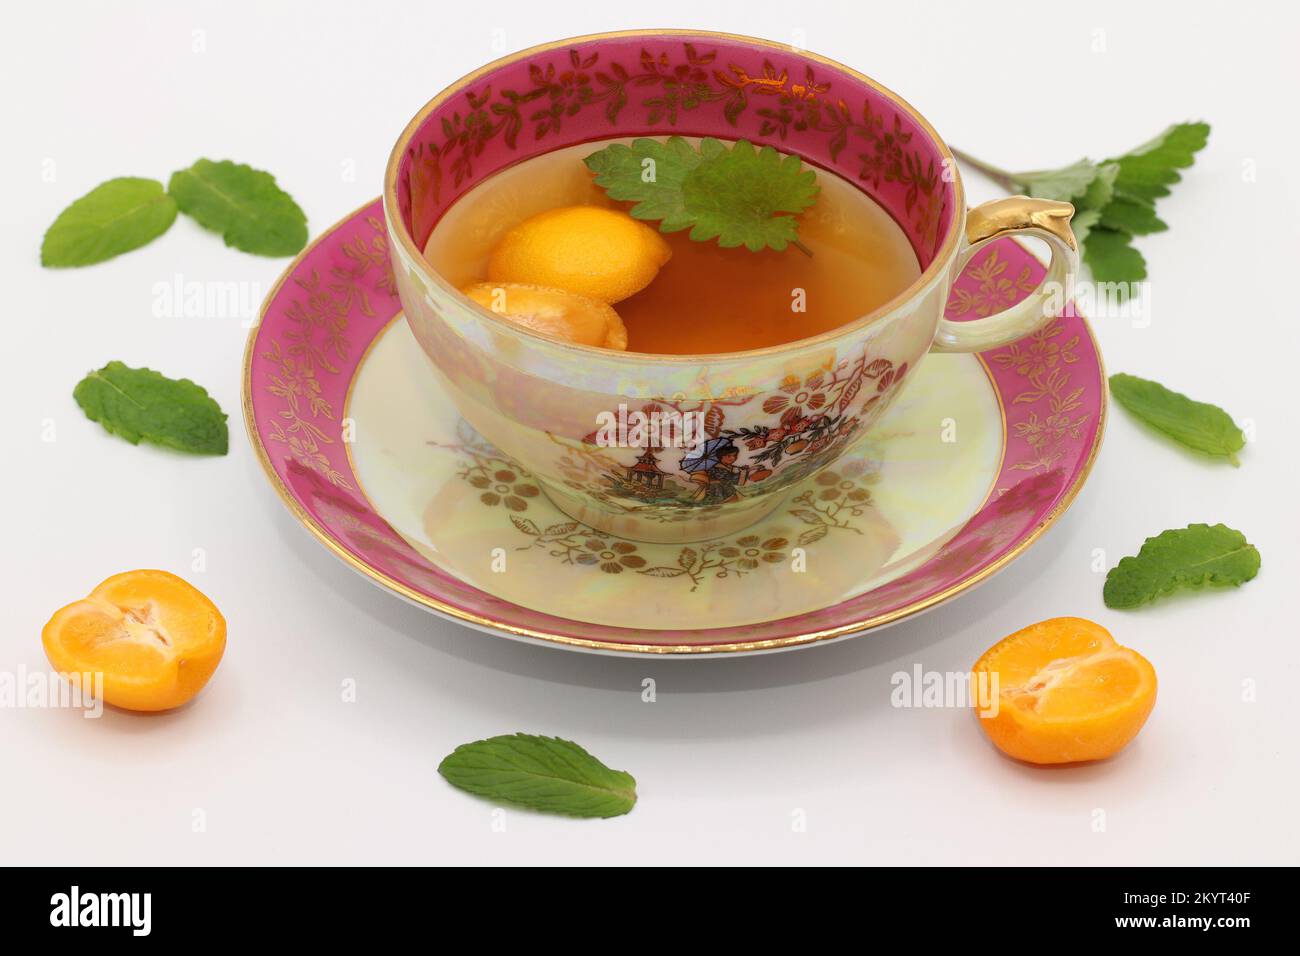 A beautiful vintage porcelain tea cup with a melissa leaf and calamansi slices. Mint leaves and calamondin fruit halves lie around.  Citrus microcarpa Stock Photo